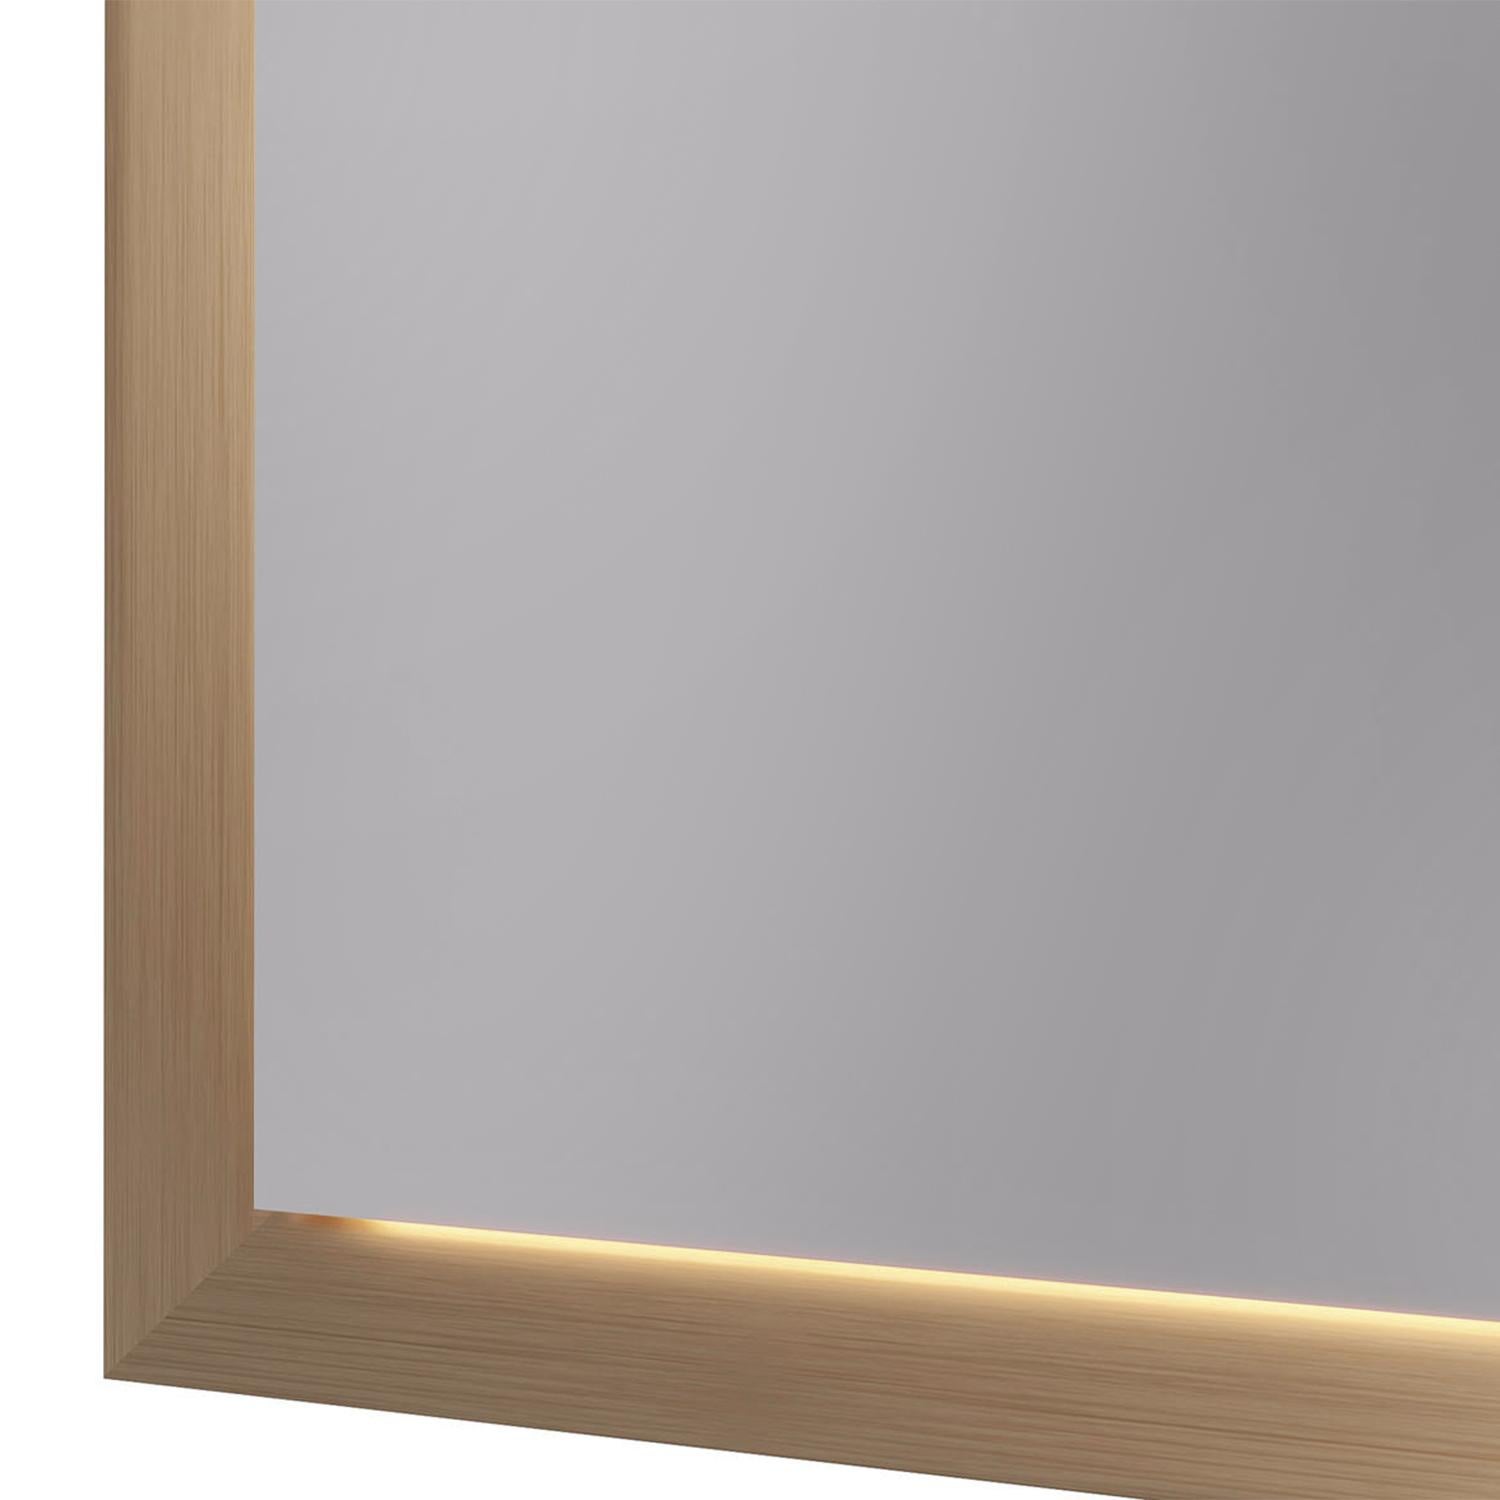 Mirror Squadro gold matte with metal frame in gold brushed matte
finish and with hoctagonal mirror glass with led backlight system.